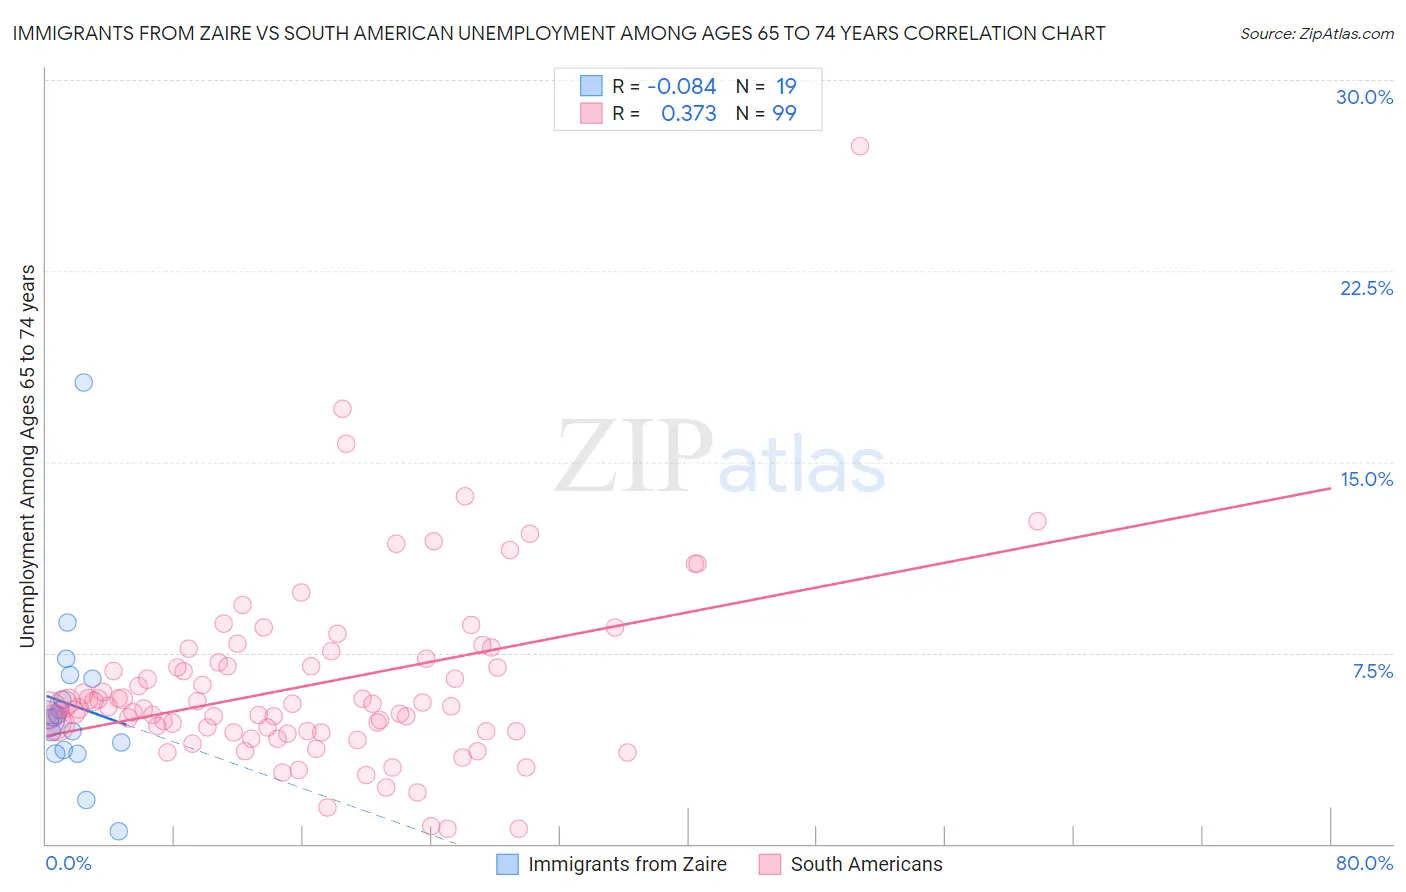 Immigrants from Zaire vs South American Unemployment Among Ages 65 to 74 years